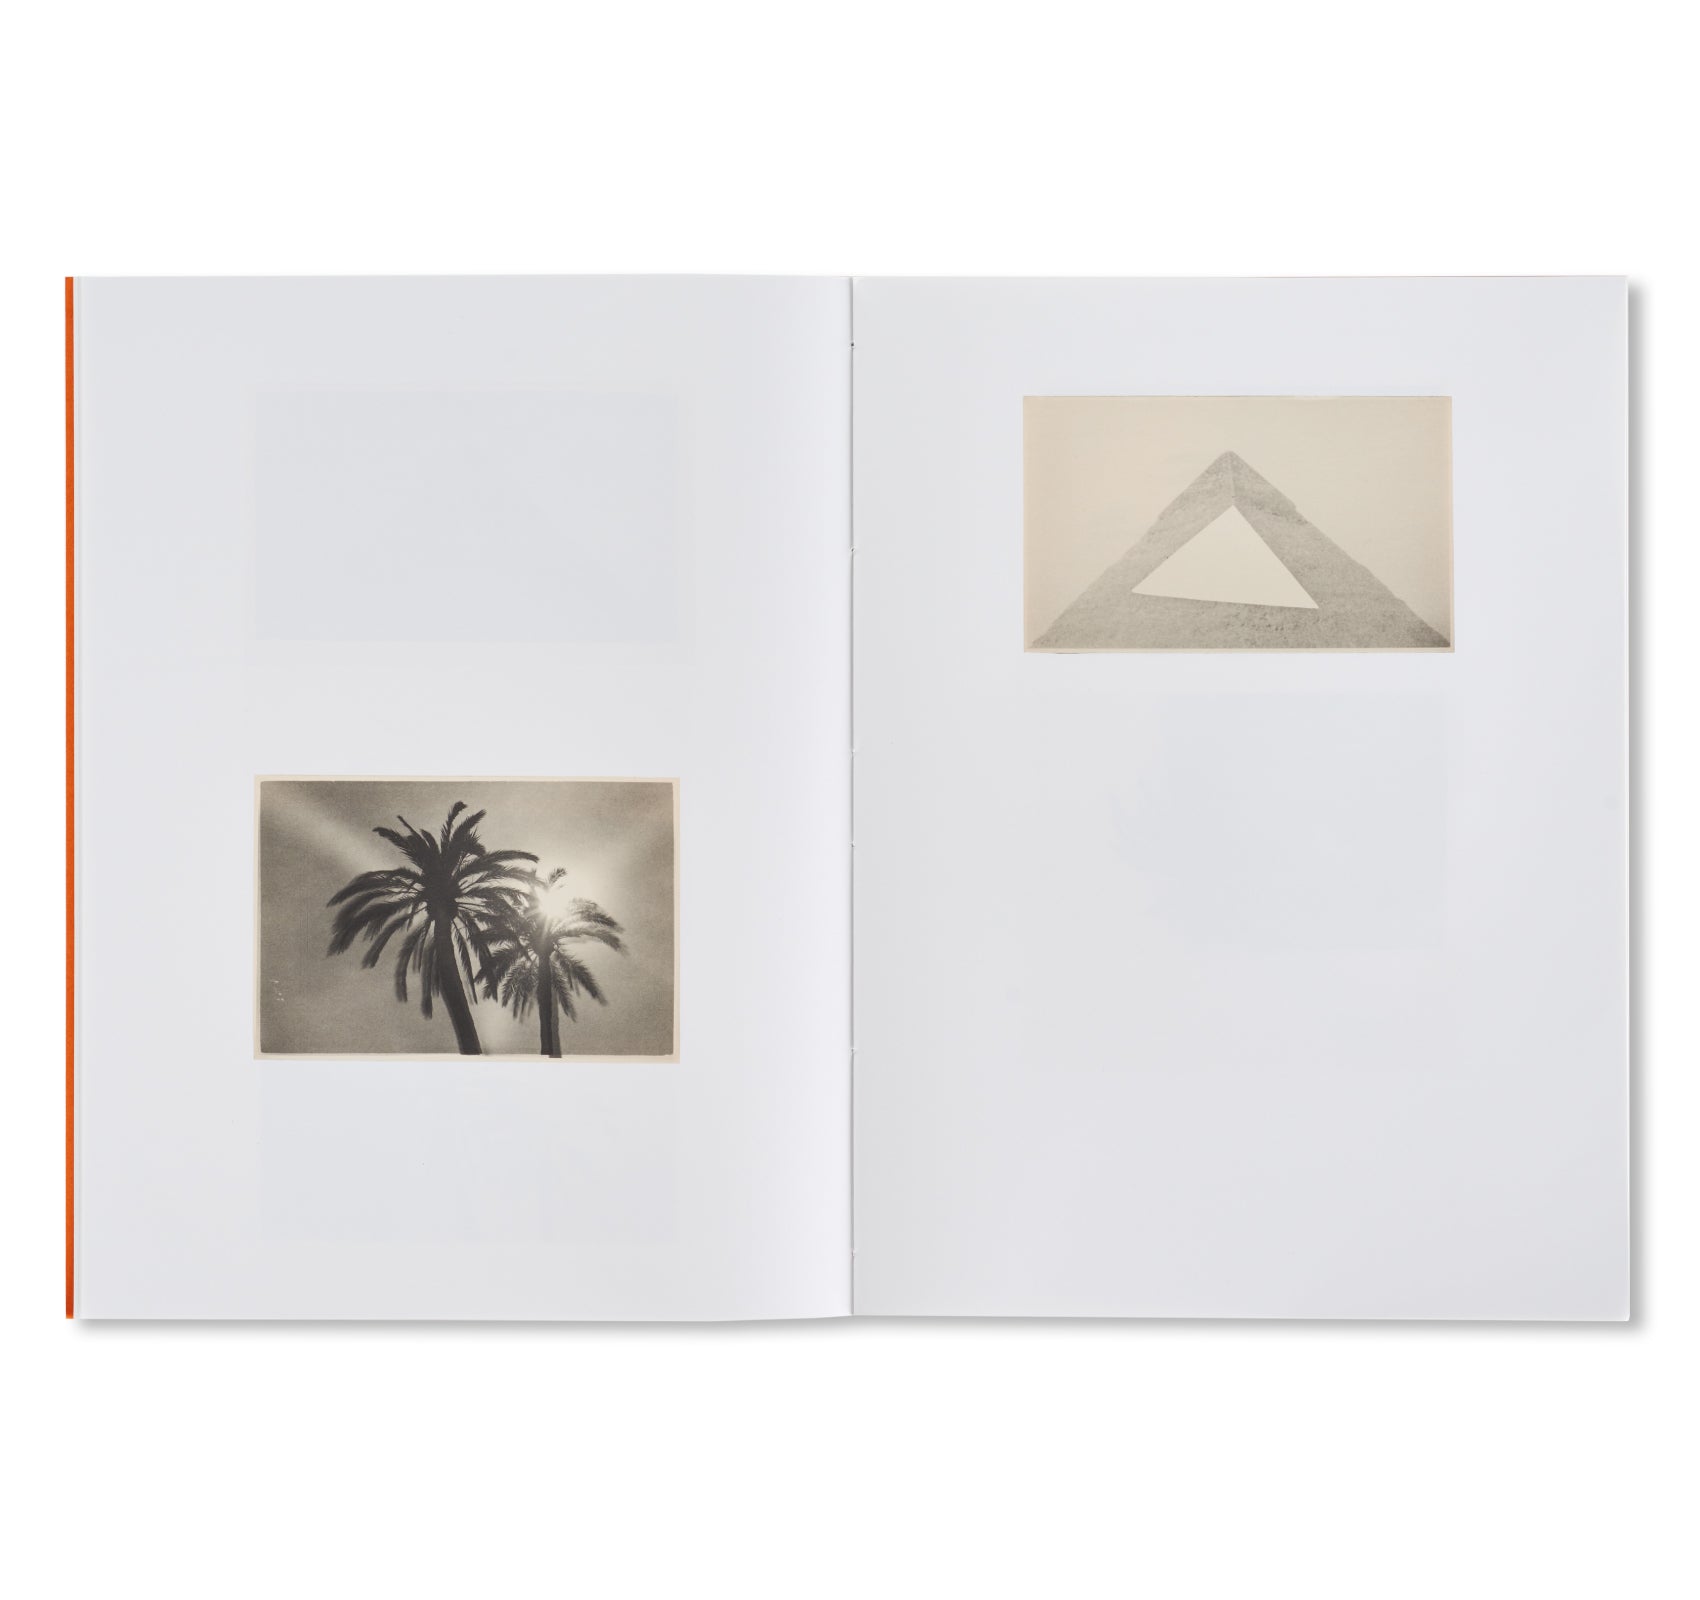 THE PYRAMIDS AND PALM TREES TEST by Bruno V. Roels [SPECIAL EDITION]